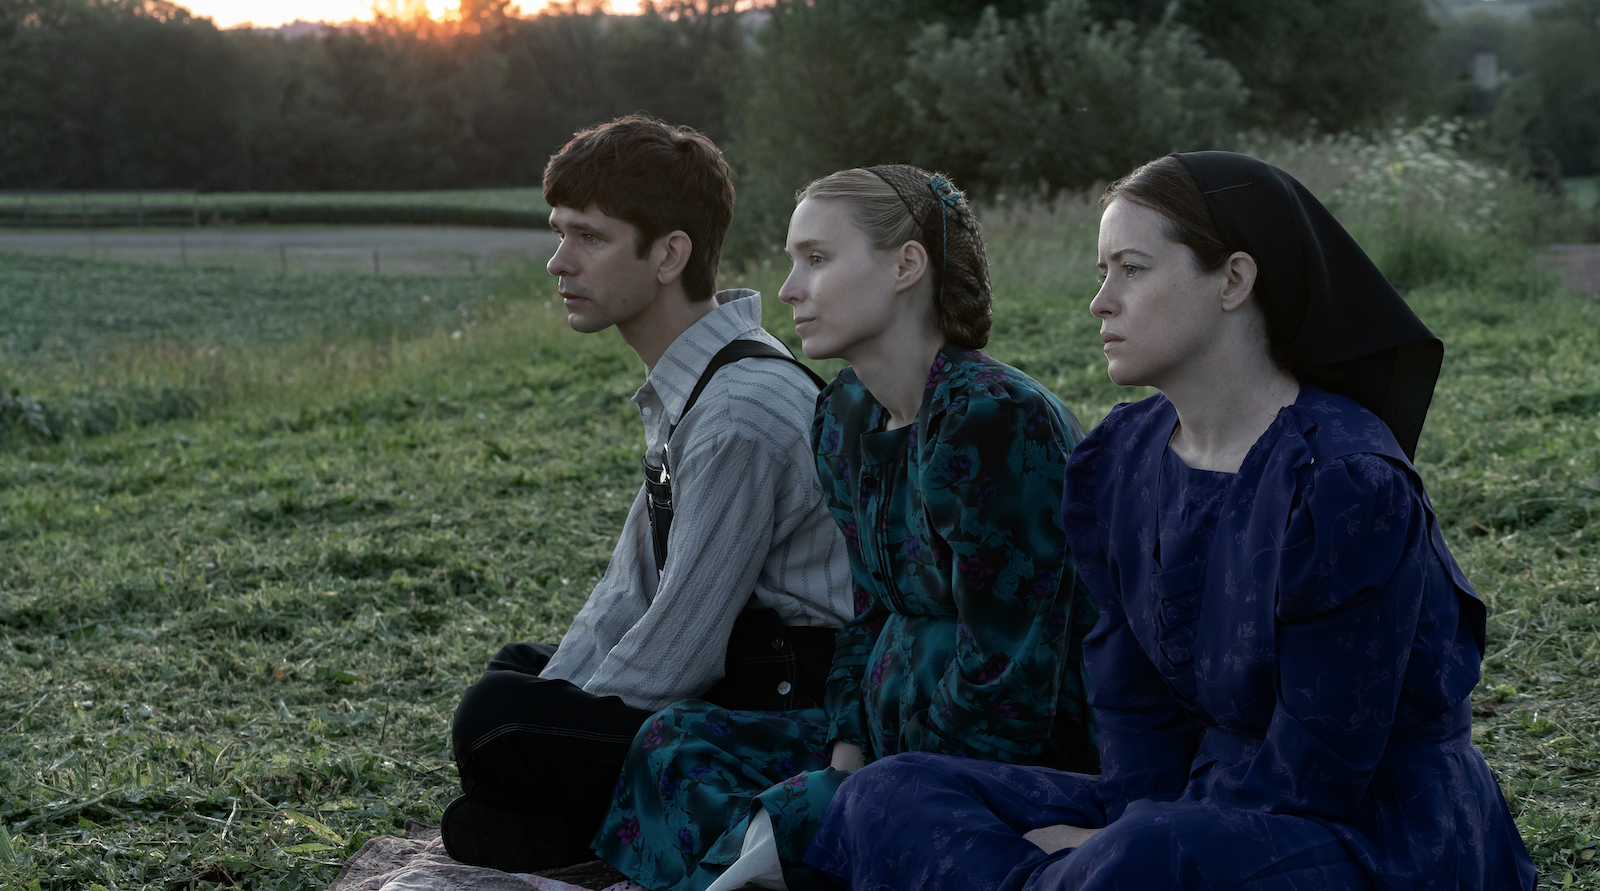 A man and two women sit in a field and look to the right off camera before a rising morning sun